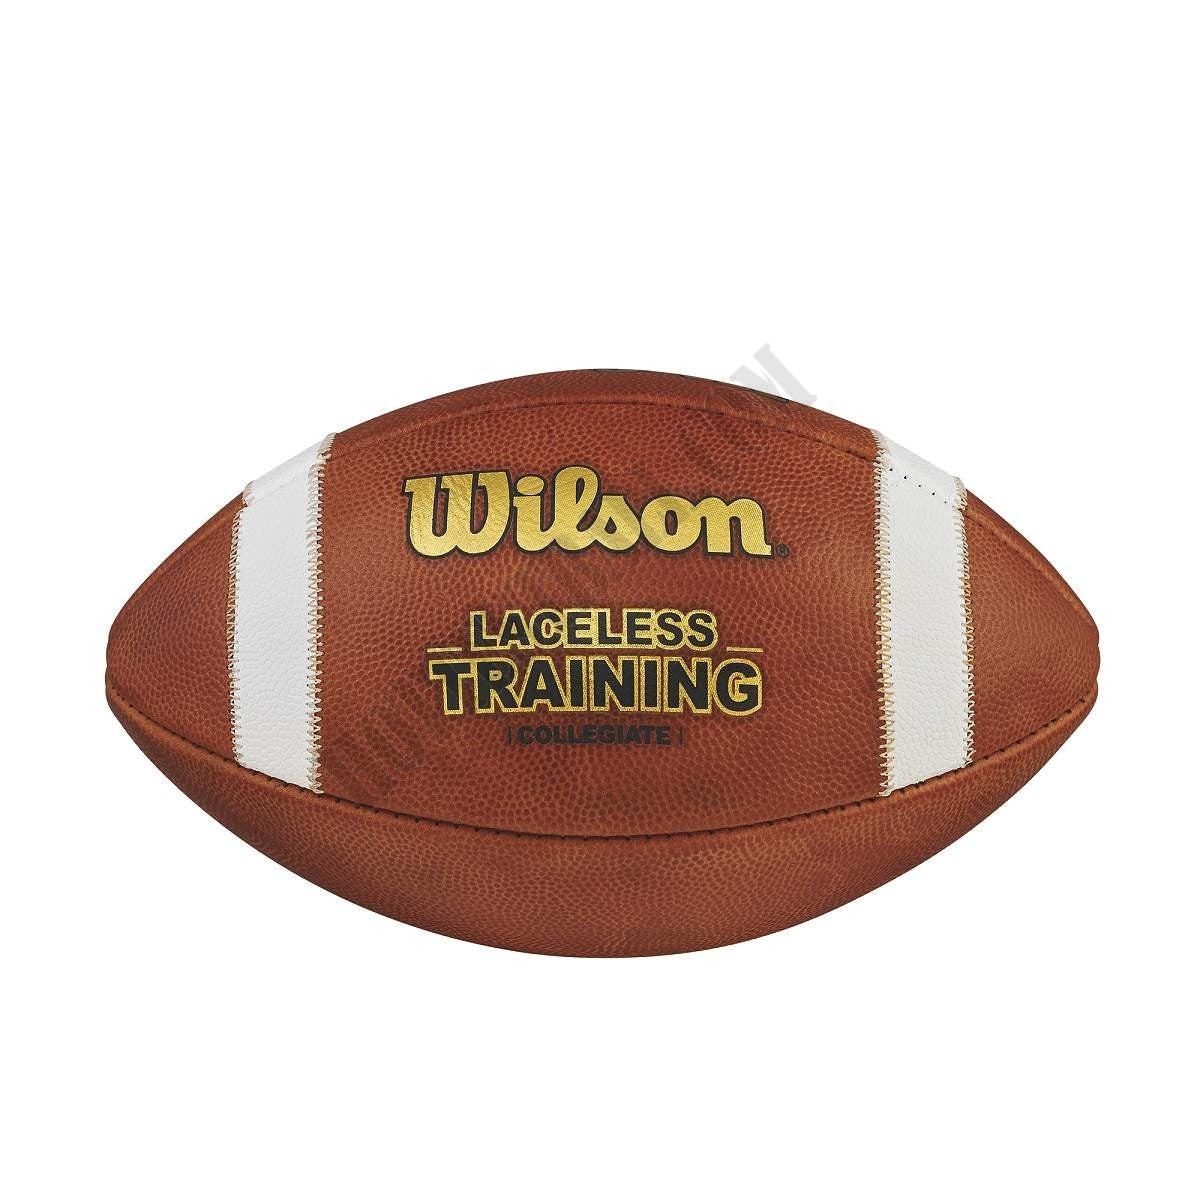 Laceless Training Football - Wilson Discount Store - -0